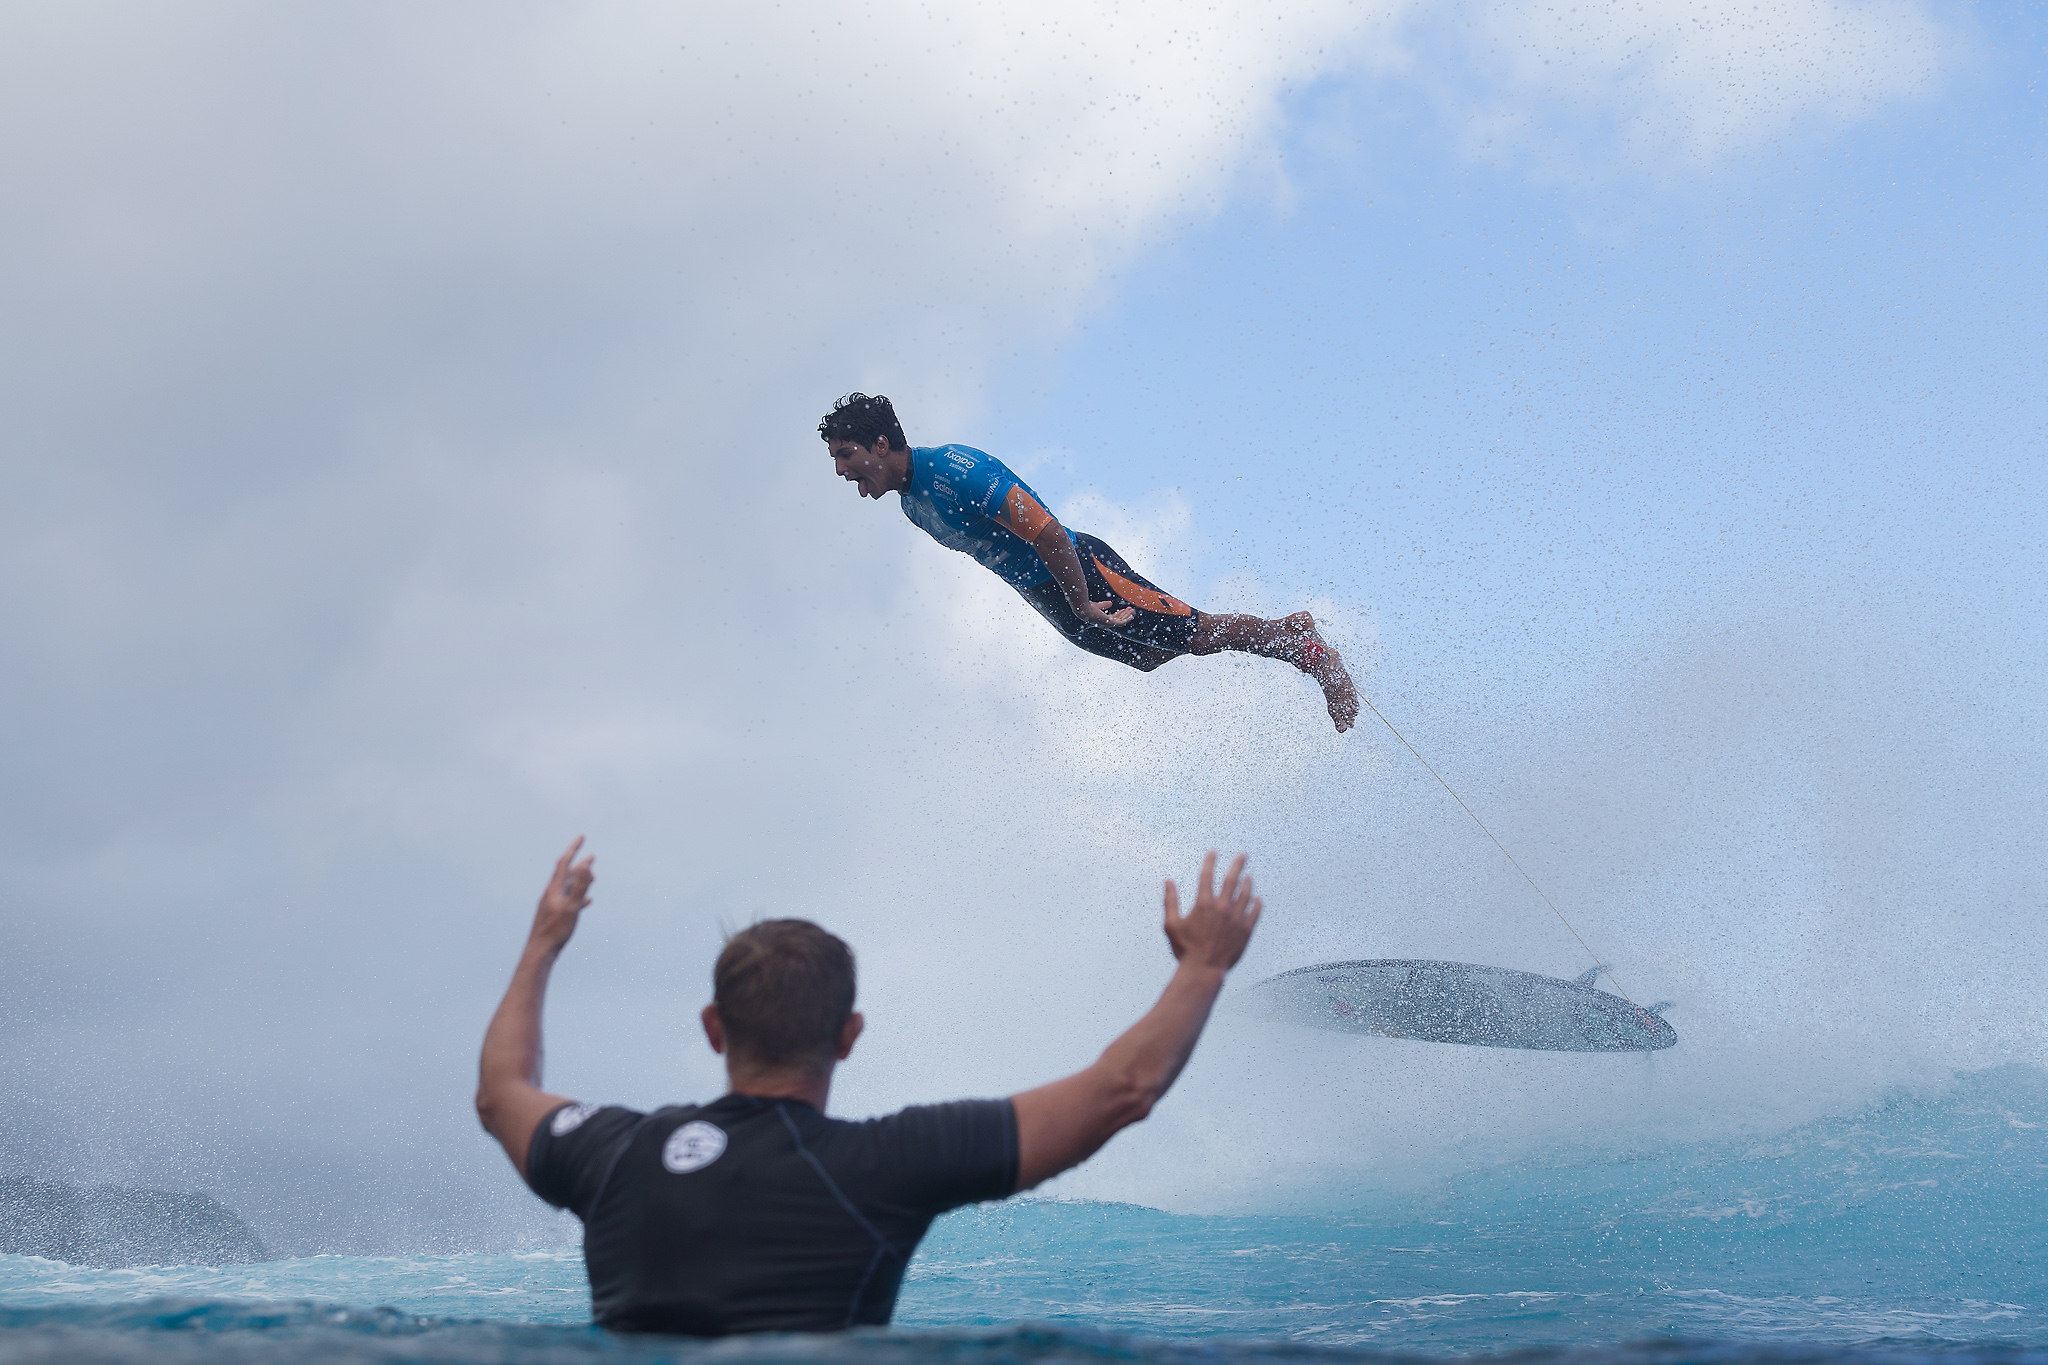 Reigning WSL World Champion and defending event winner Gabriel Medina of Maresias, Sao Paulo, Brazil (pictured) soars through the air after completing a perfect 10 point ride during Round 4 of the Billabong Pro Tahiti at Teahupoo on 24 August 2015. IMAGE CREDIT: © WSL / Cestari PHOTOGRAPHER: Kelly Cestari SOCIAL MEDIA TAG: @wsl @KC80